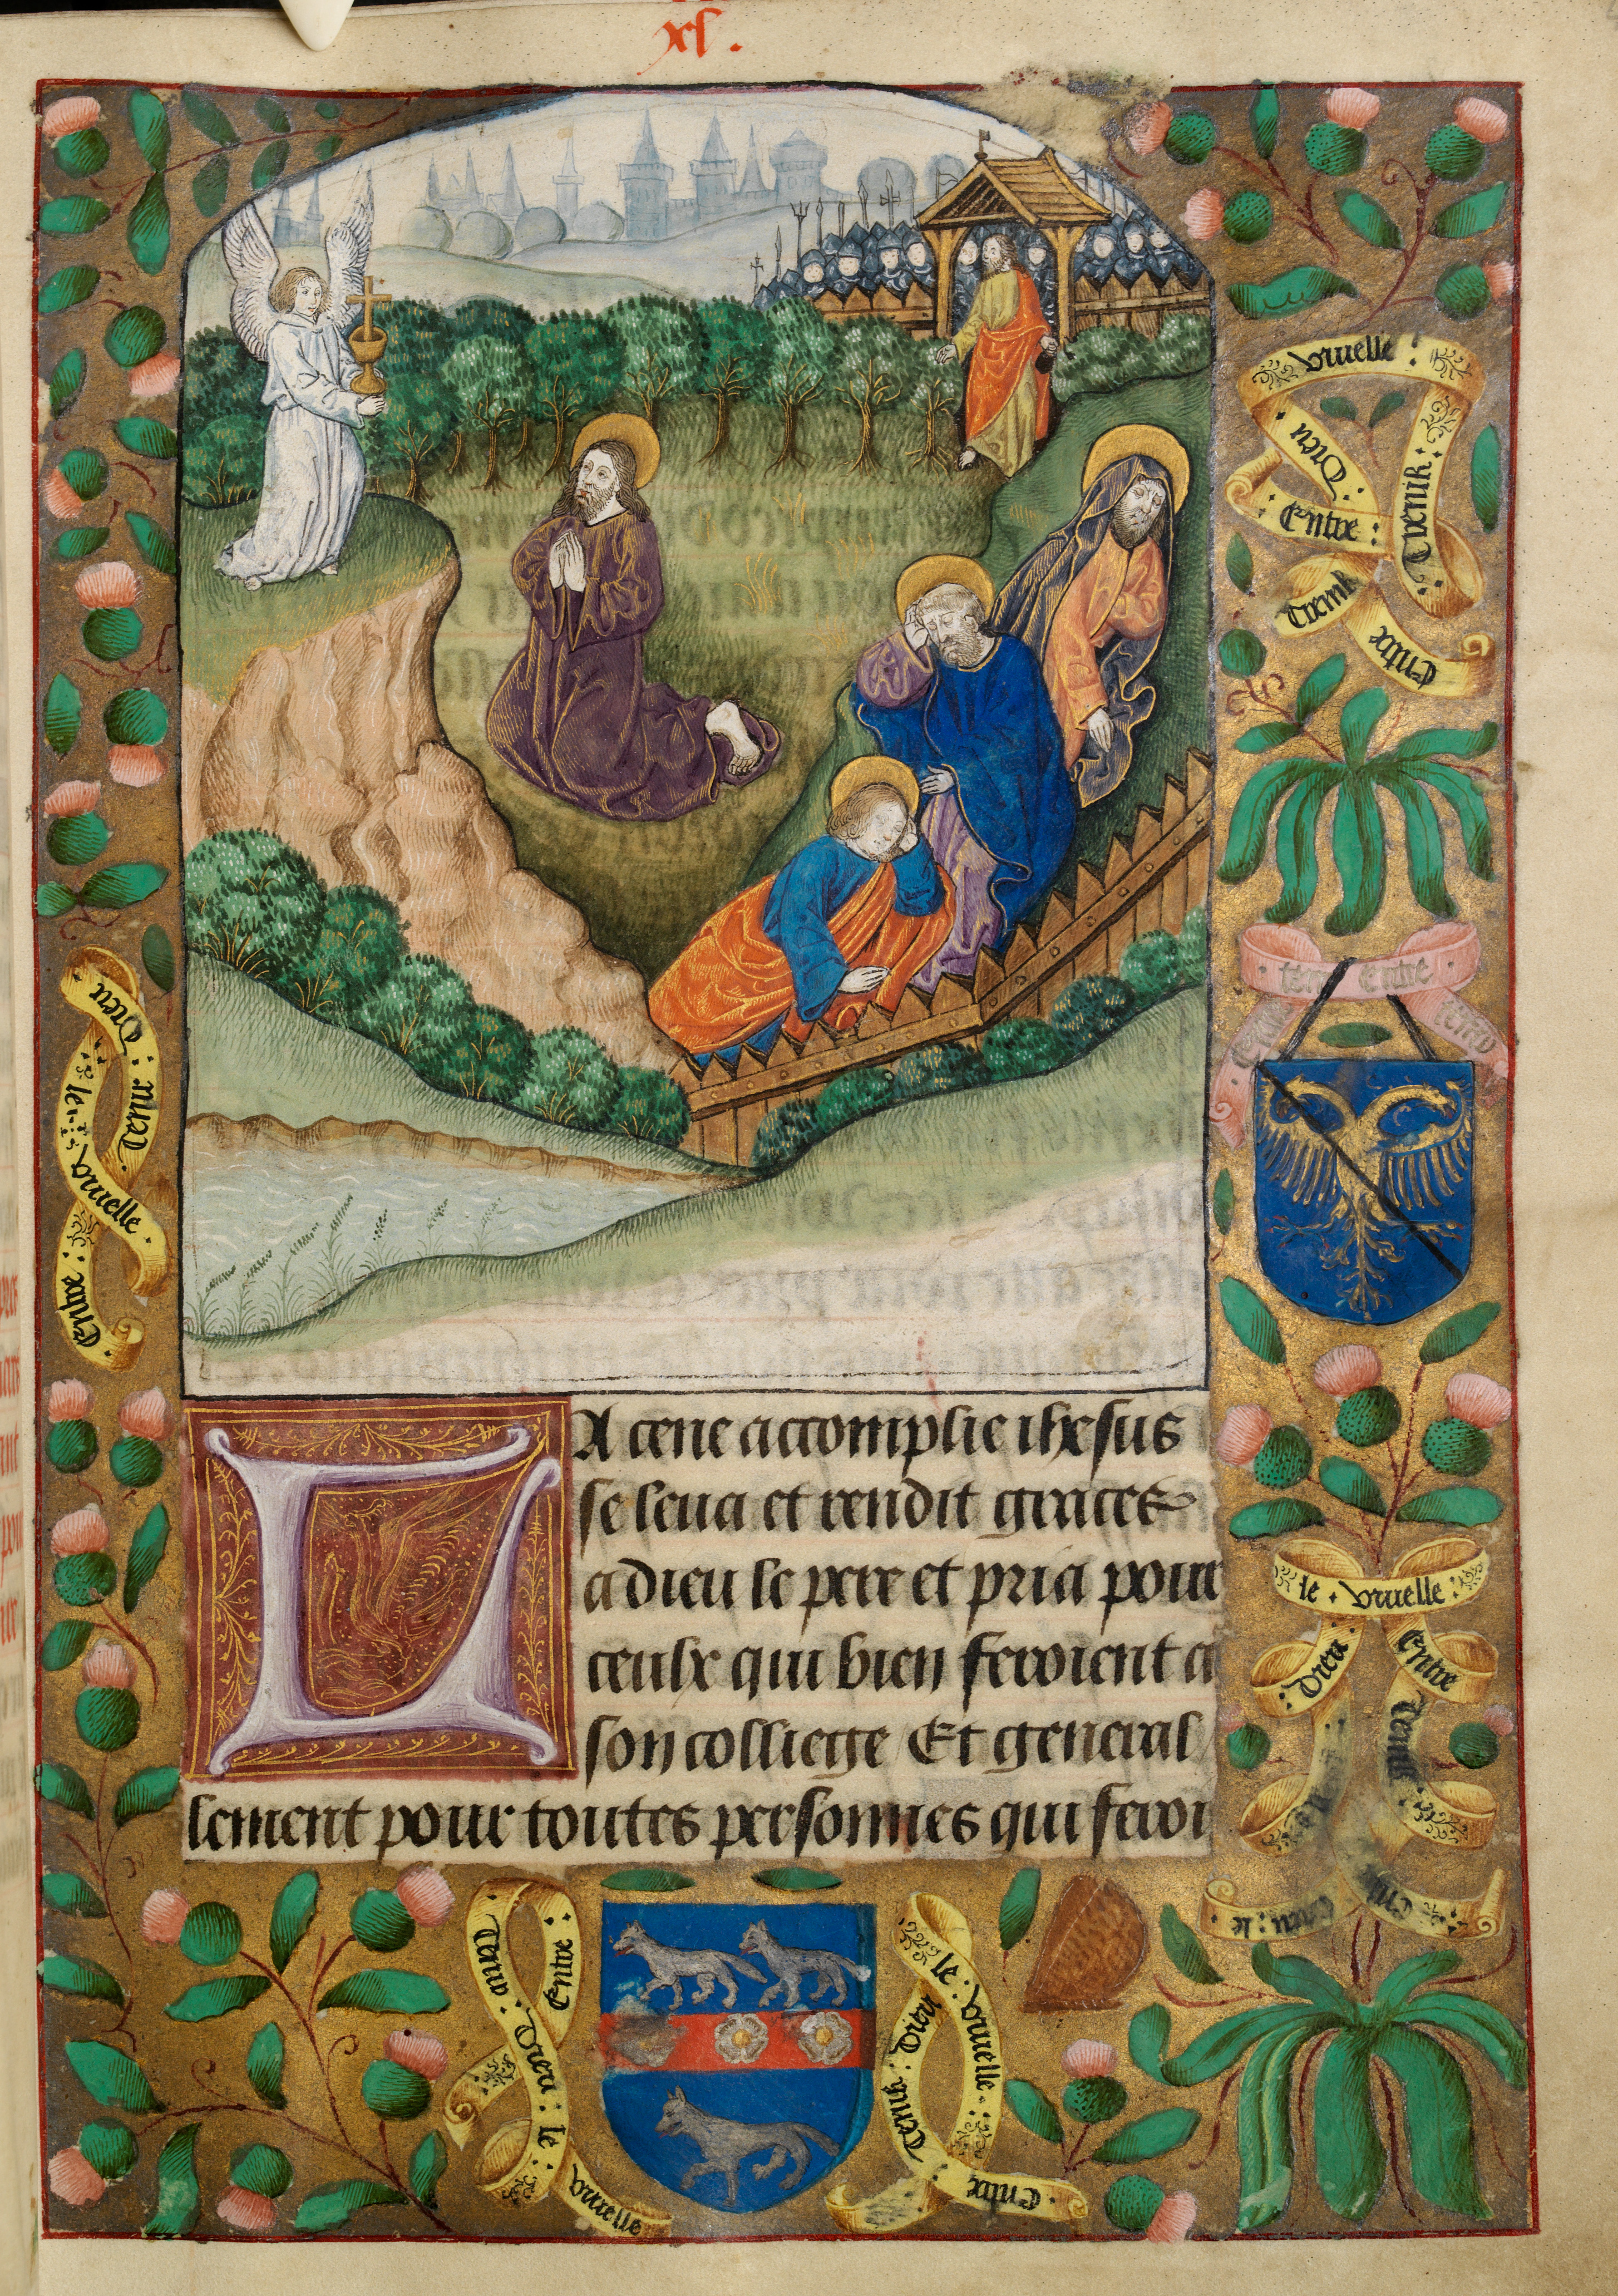 Christ praying in the garden of Gethsemane. Two shields of unidentified arms in borders, with motto “Entre tenir Dieu le viuelle” (f. 40)